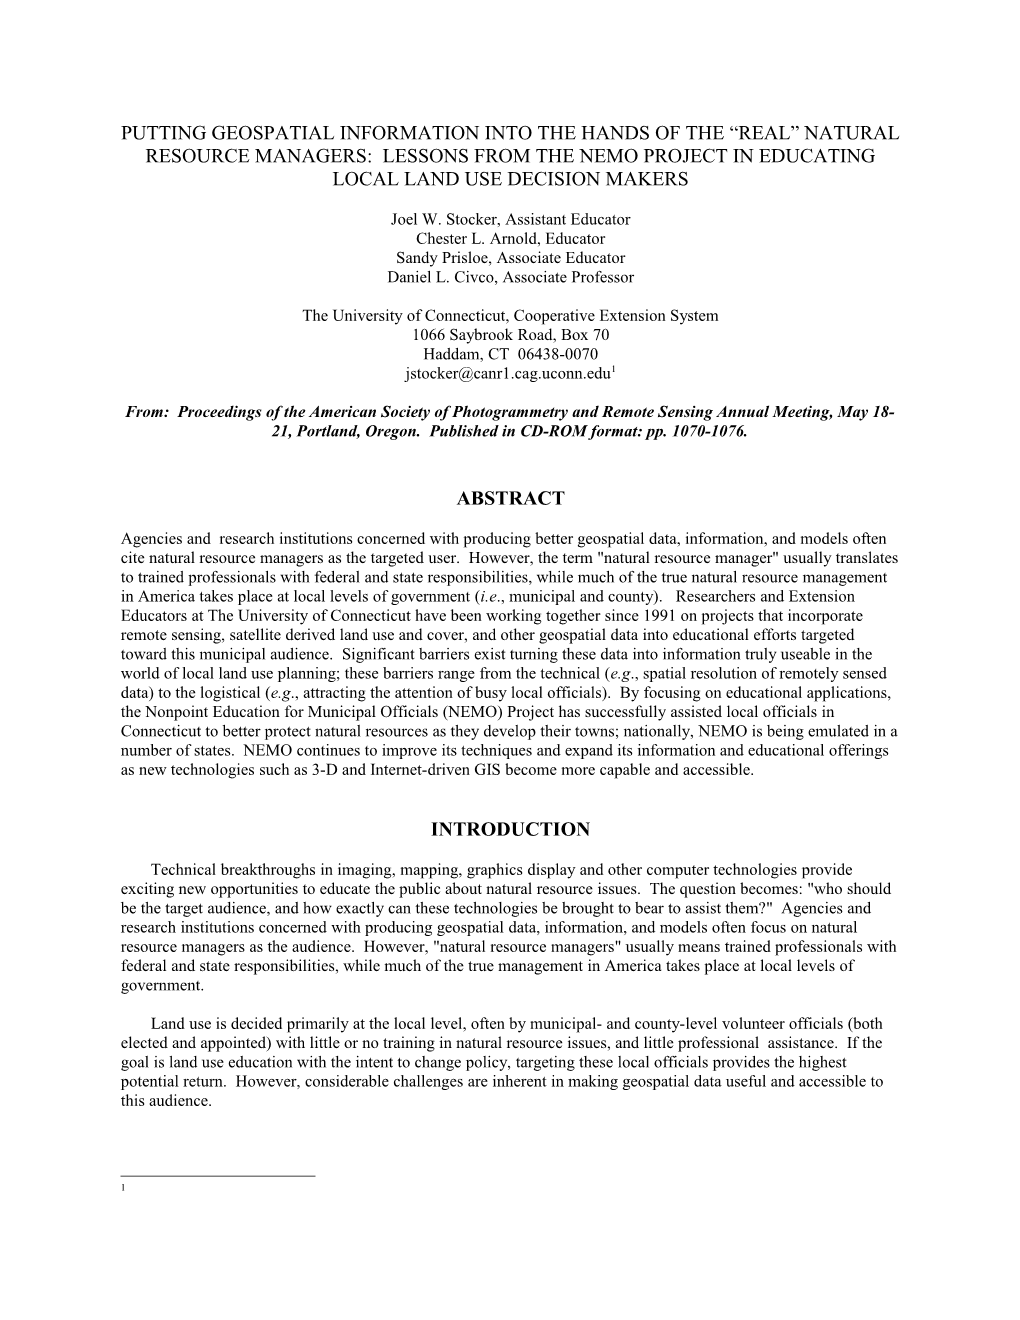 ASPRS Conference Paper